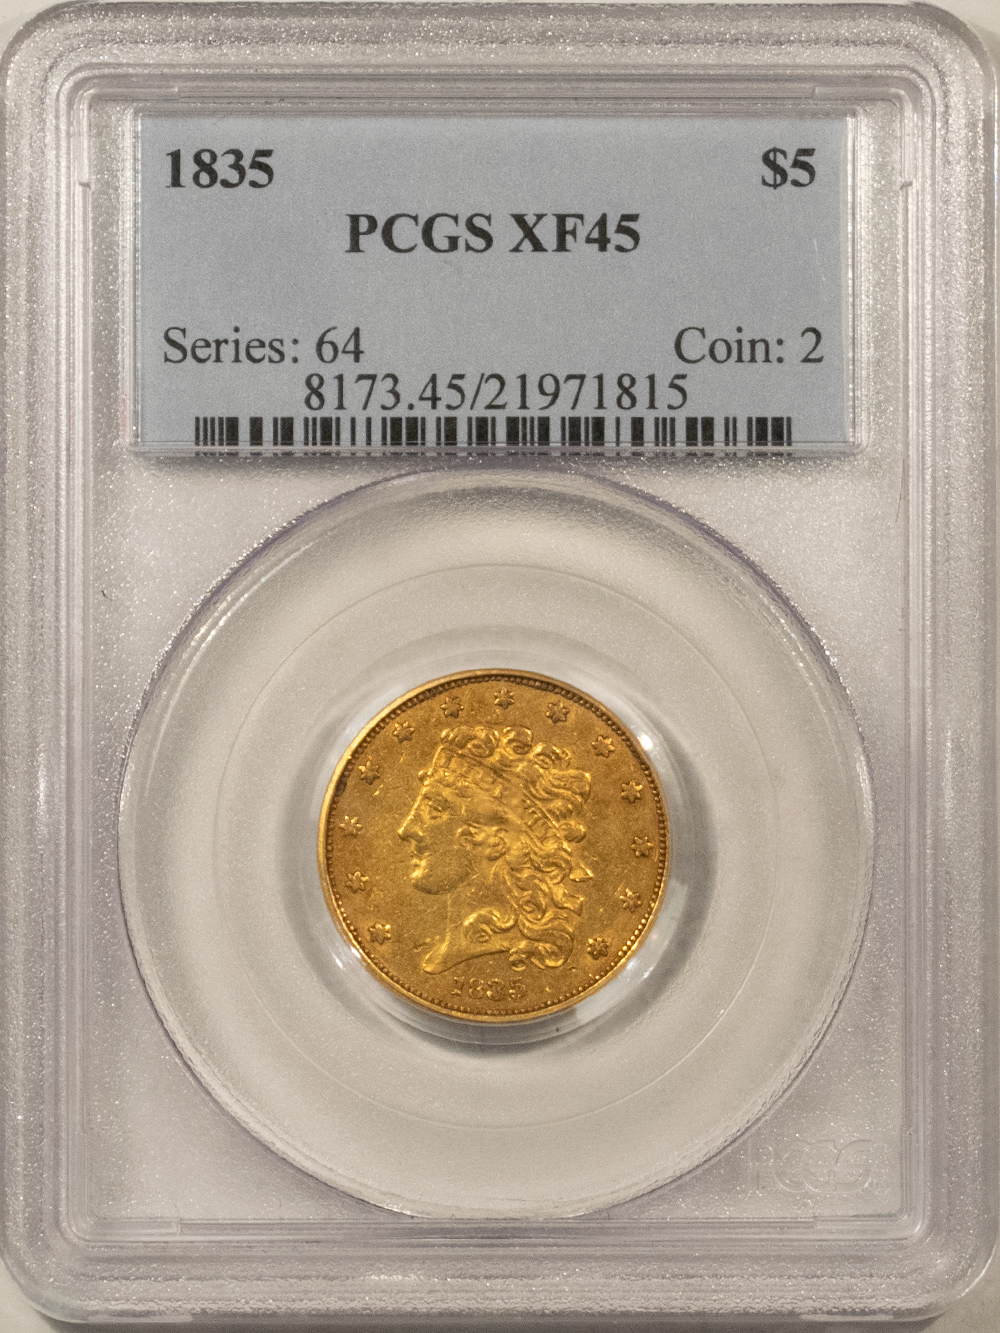 1835 $5 CLASSIC HEAD GOLD HALF EAGLE PCGS XF-45, PLEASING LOOK, AFFORDABLE GRADE